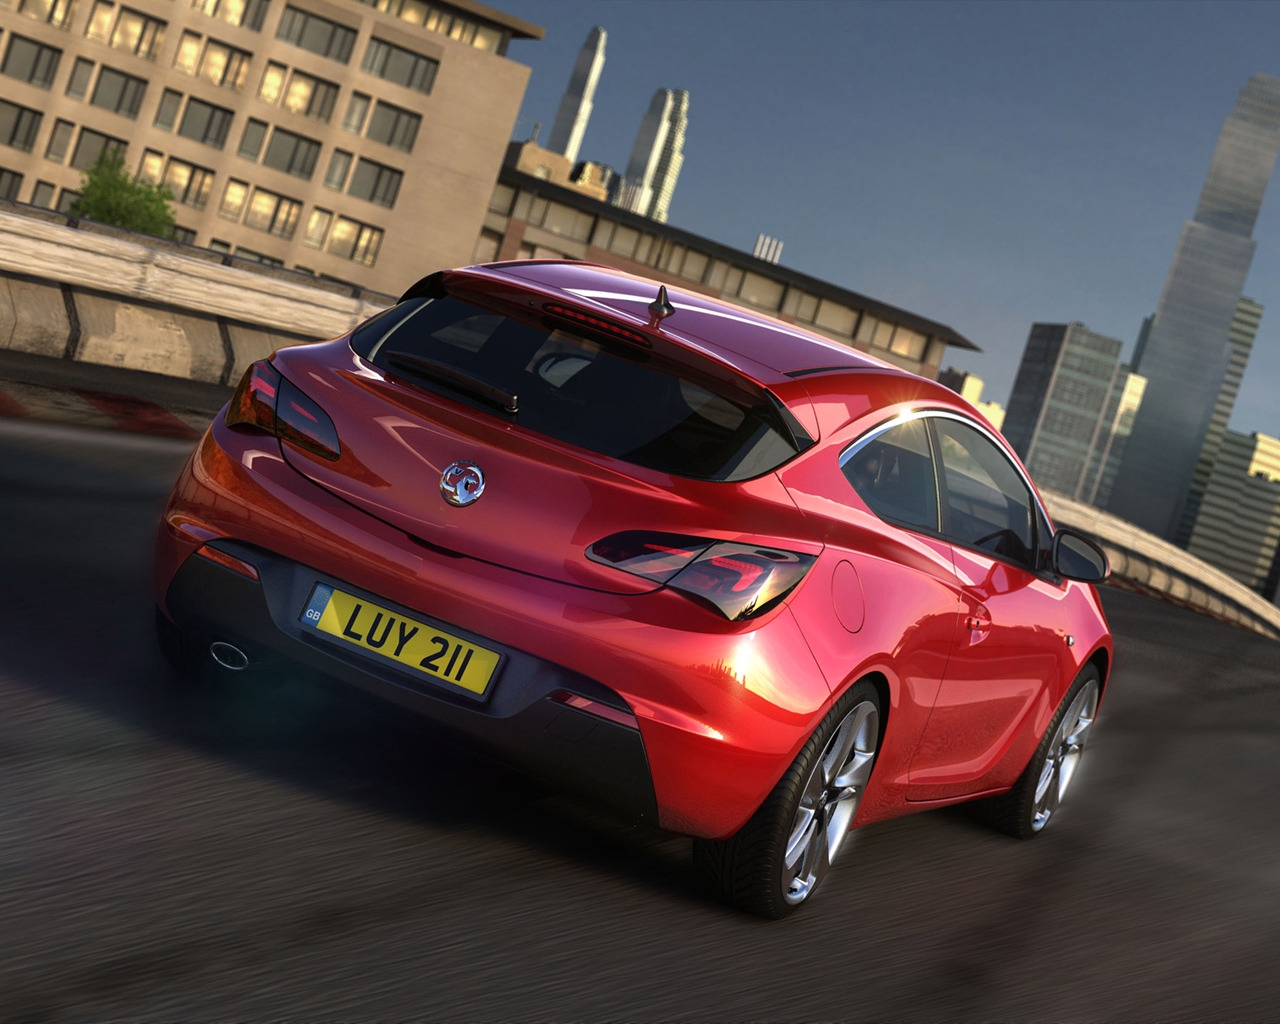 2012 Vauxhall Astra GTC Speed for 1280 x 1024 resolution